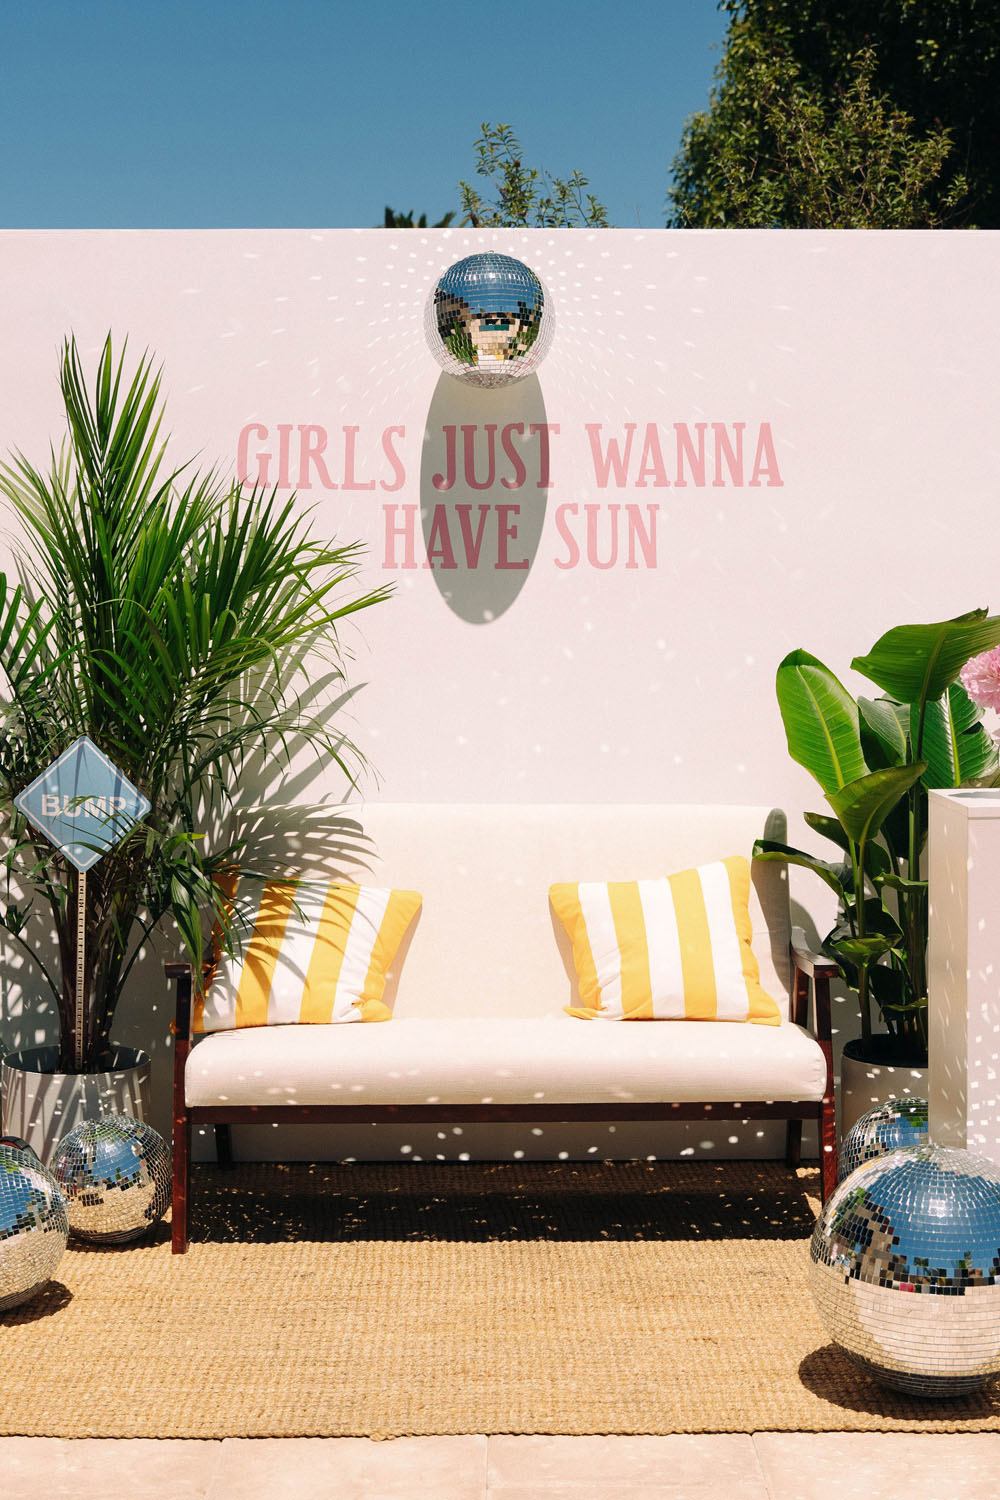 "Girls just wanna have sun" sign for Palm Springs baby shower